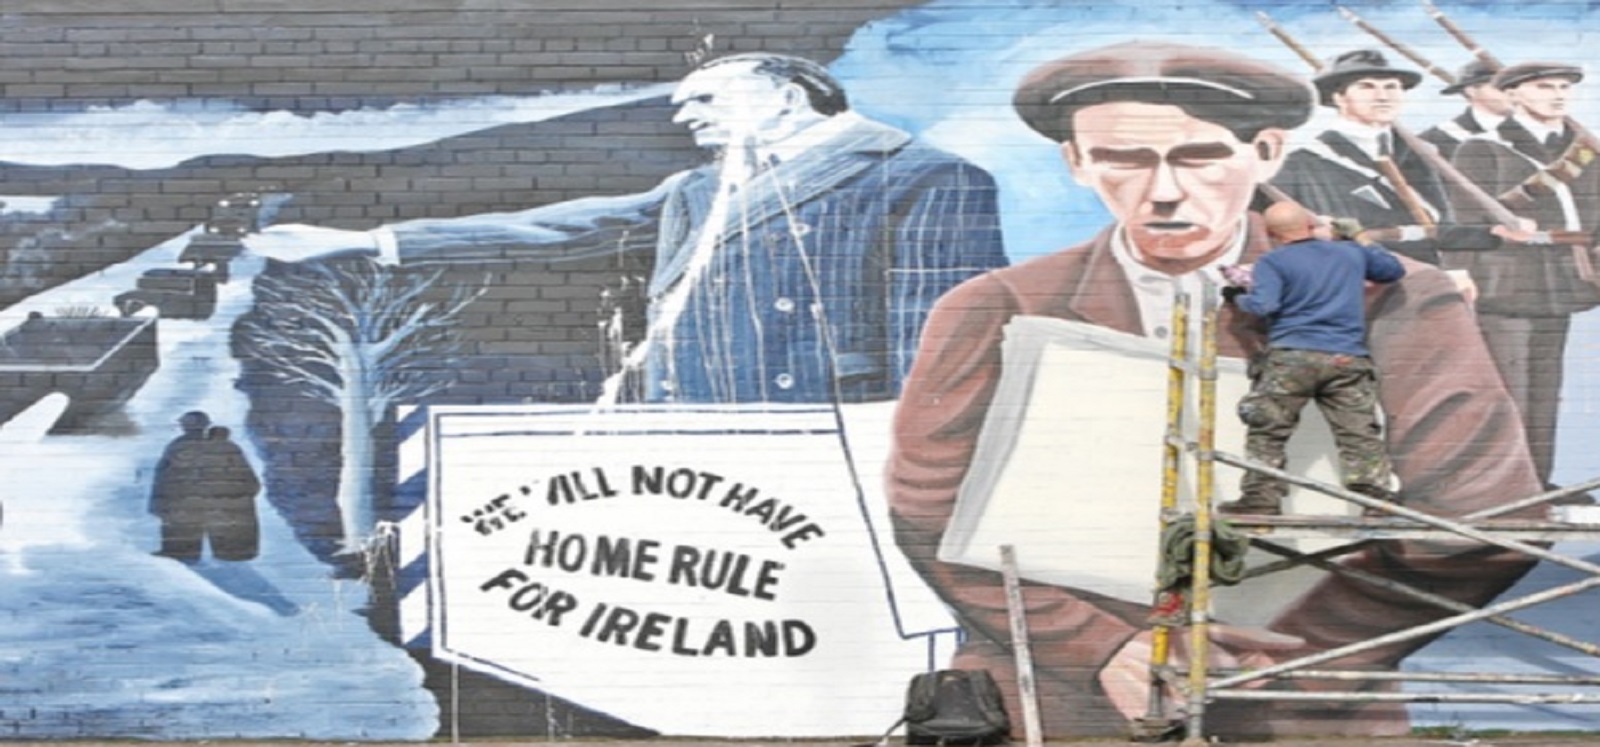 We all not have Home Rule in Ireland - 1600x